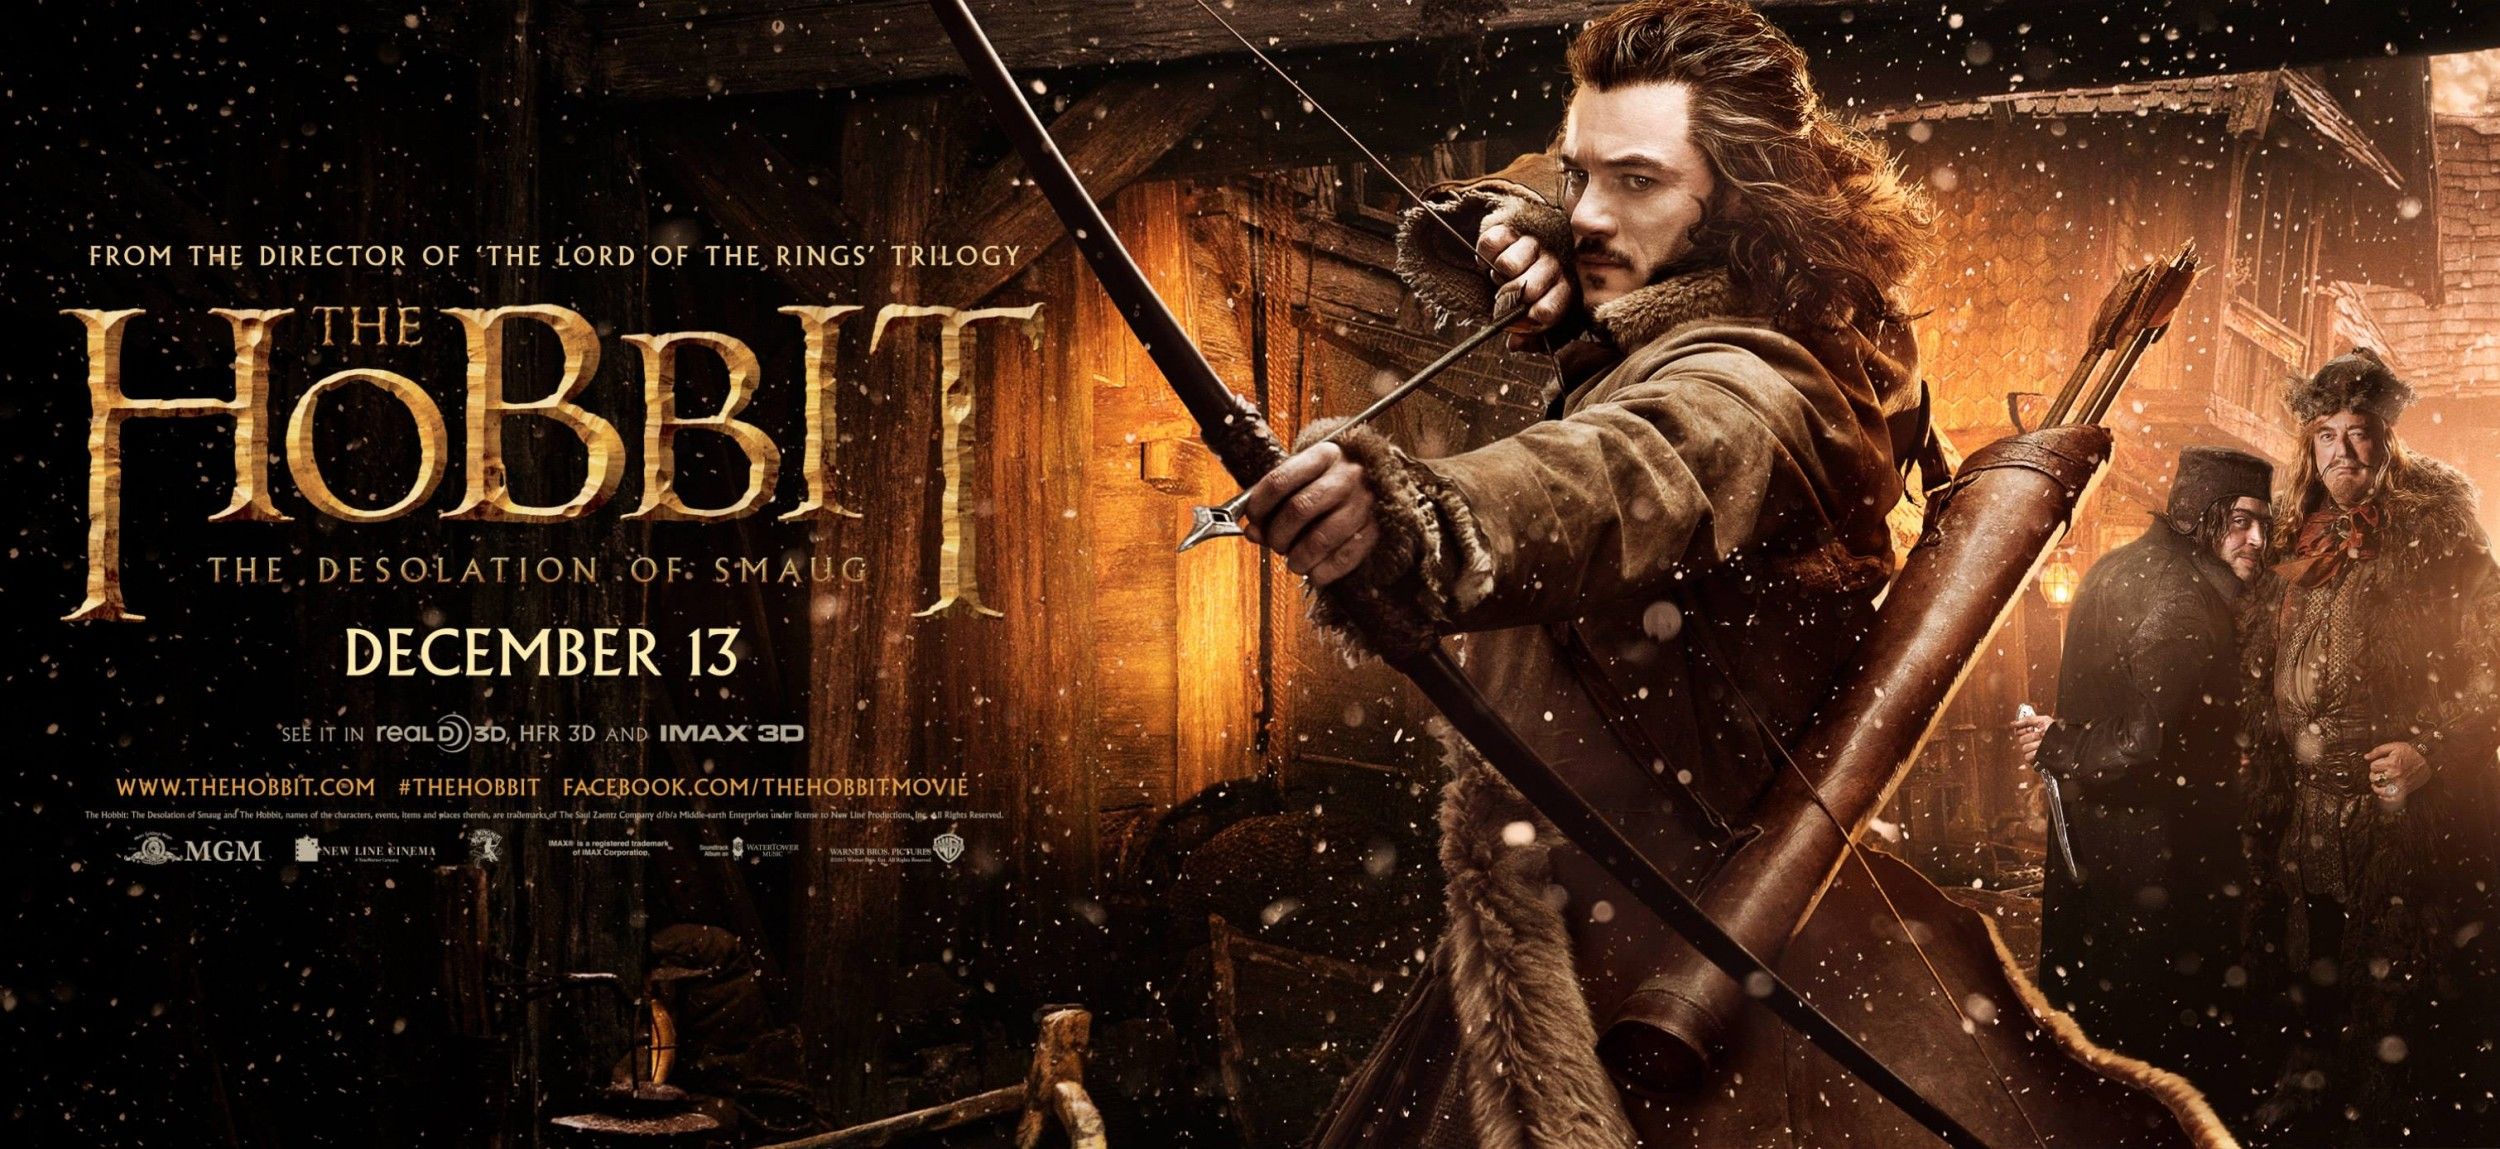 The Hobbit The Desolation of Smaug Bard the Bowman Poster